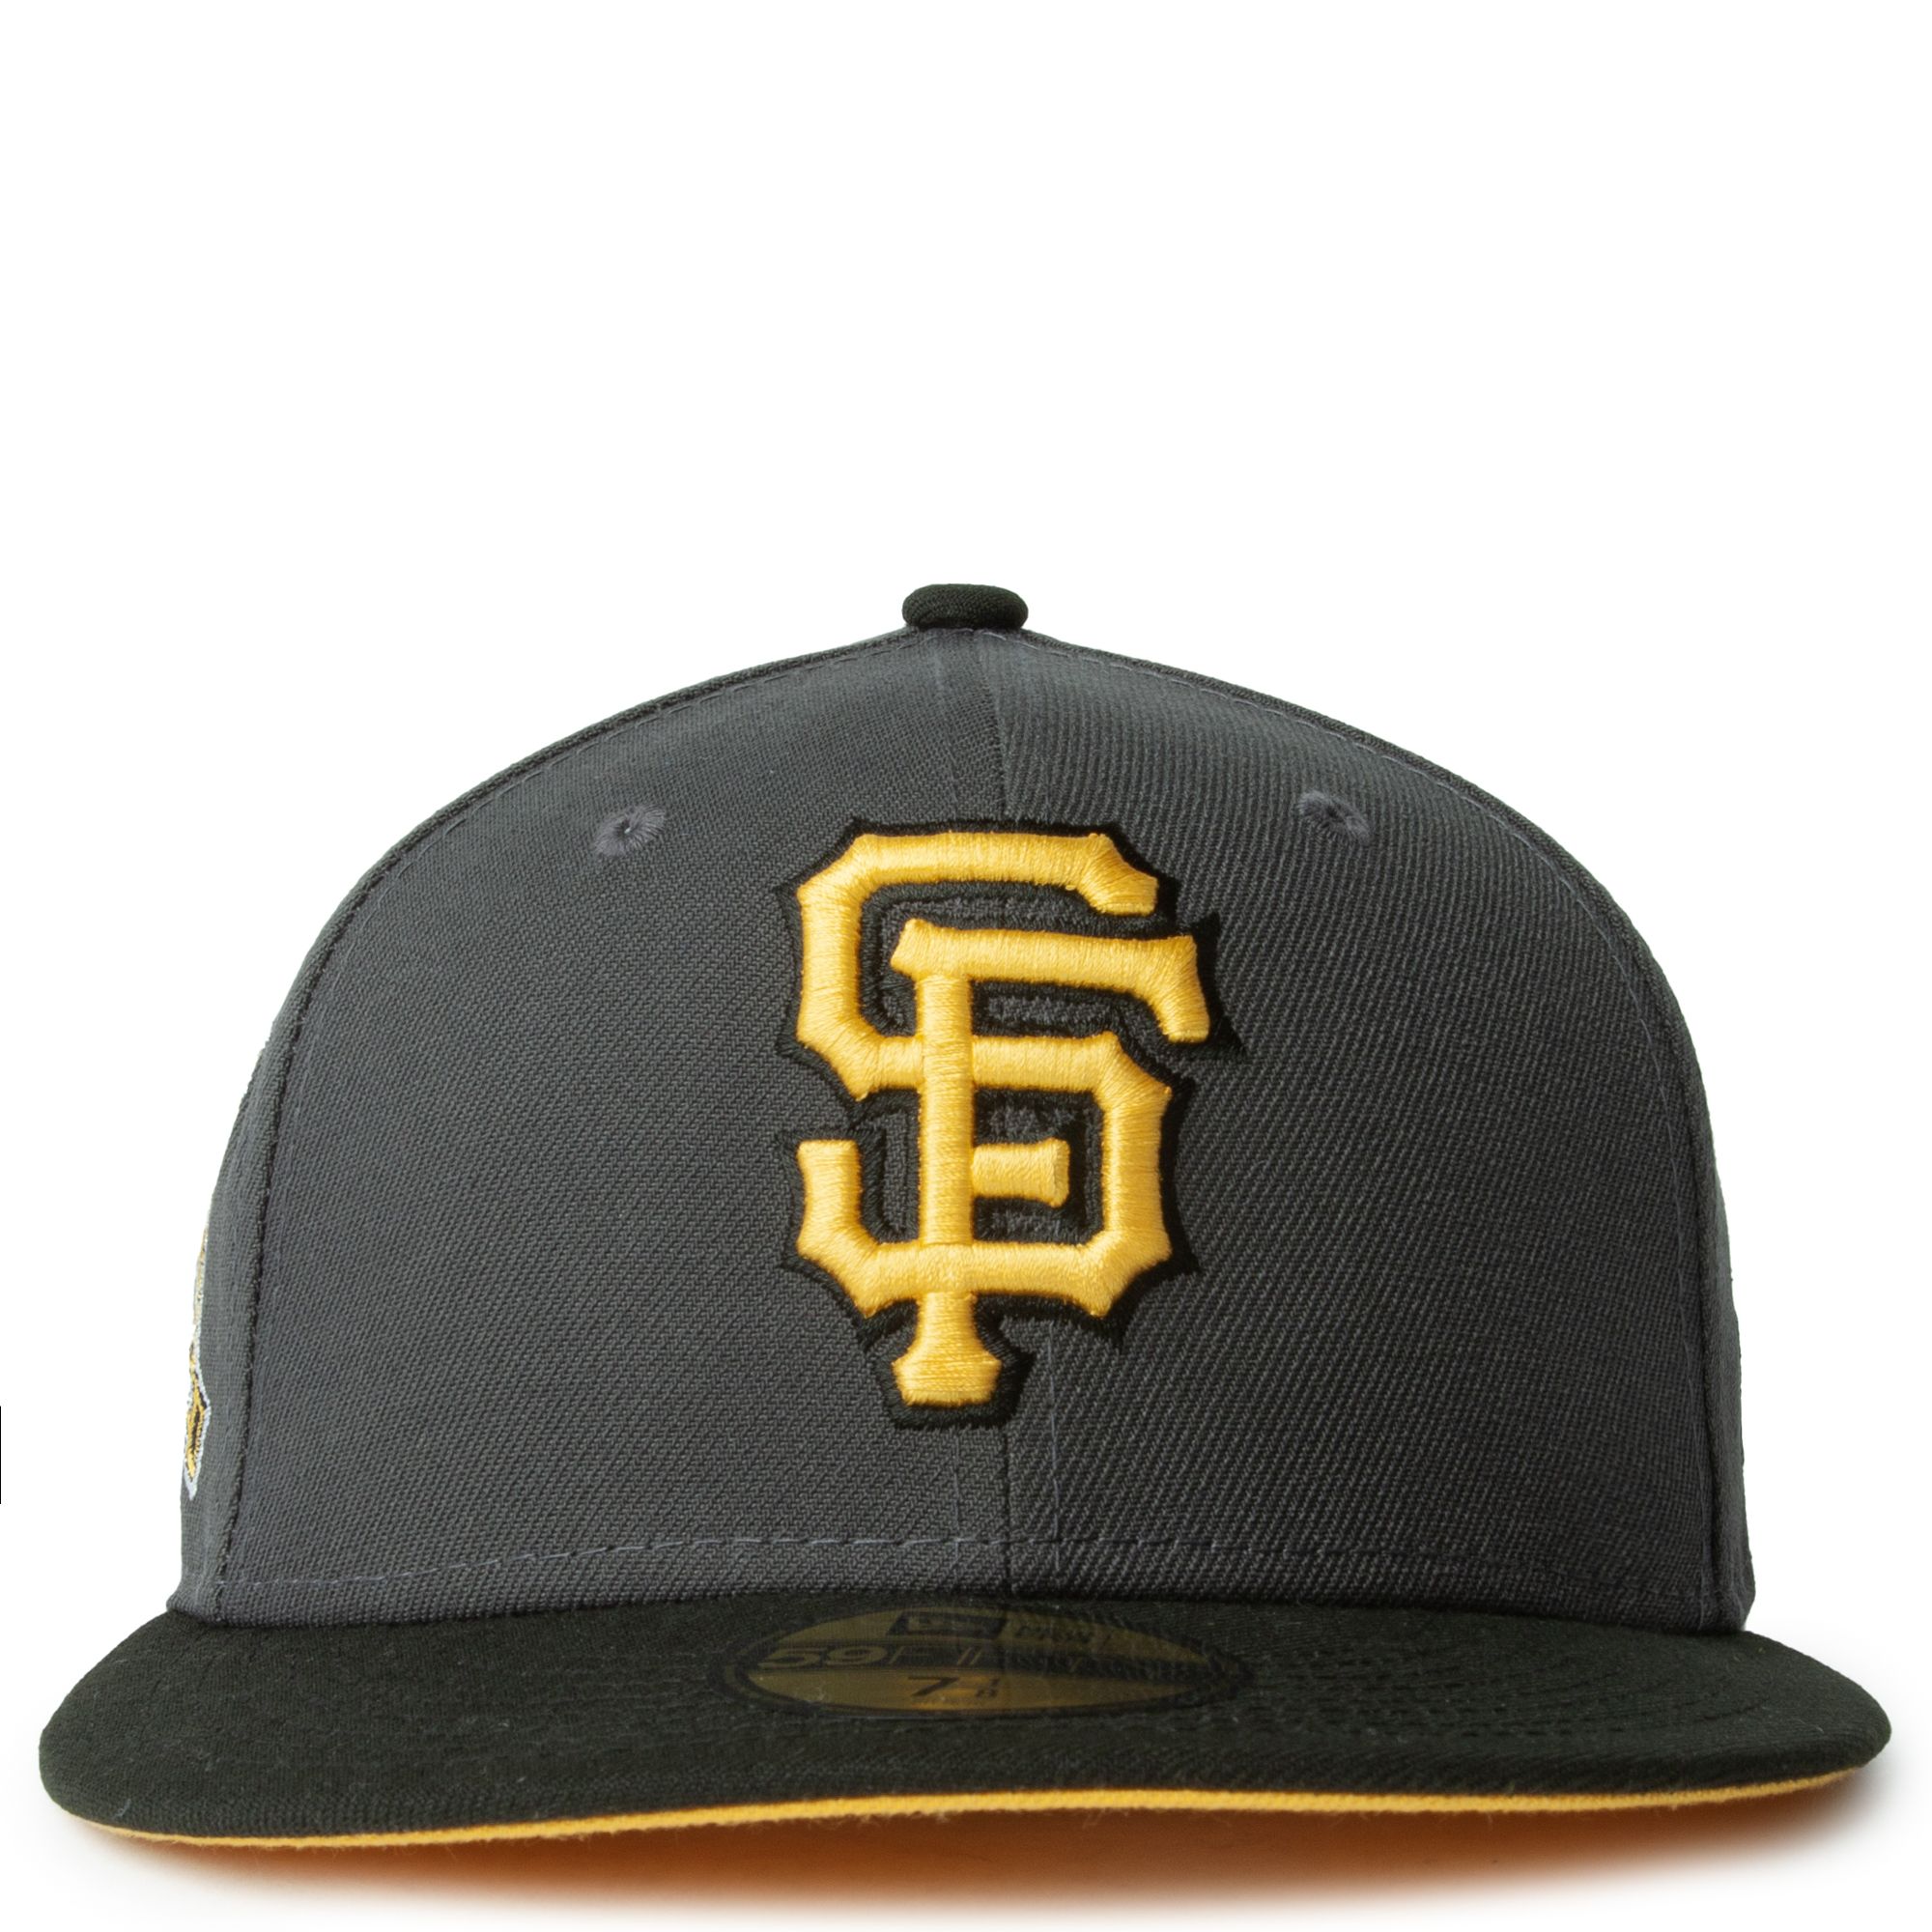 This is the cap of the San Francisco Giants